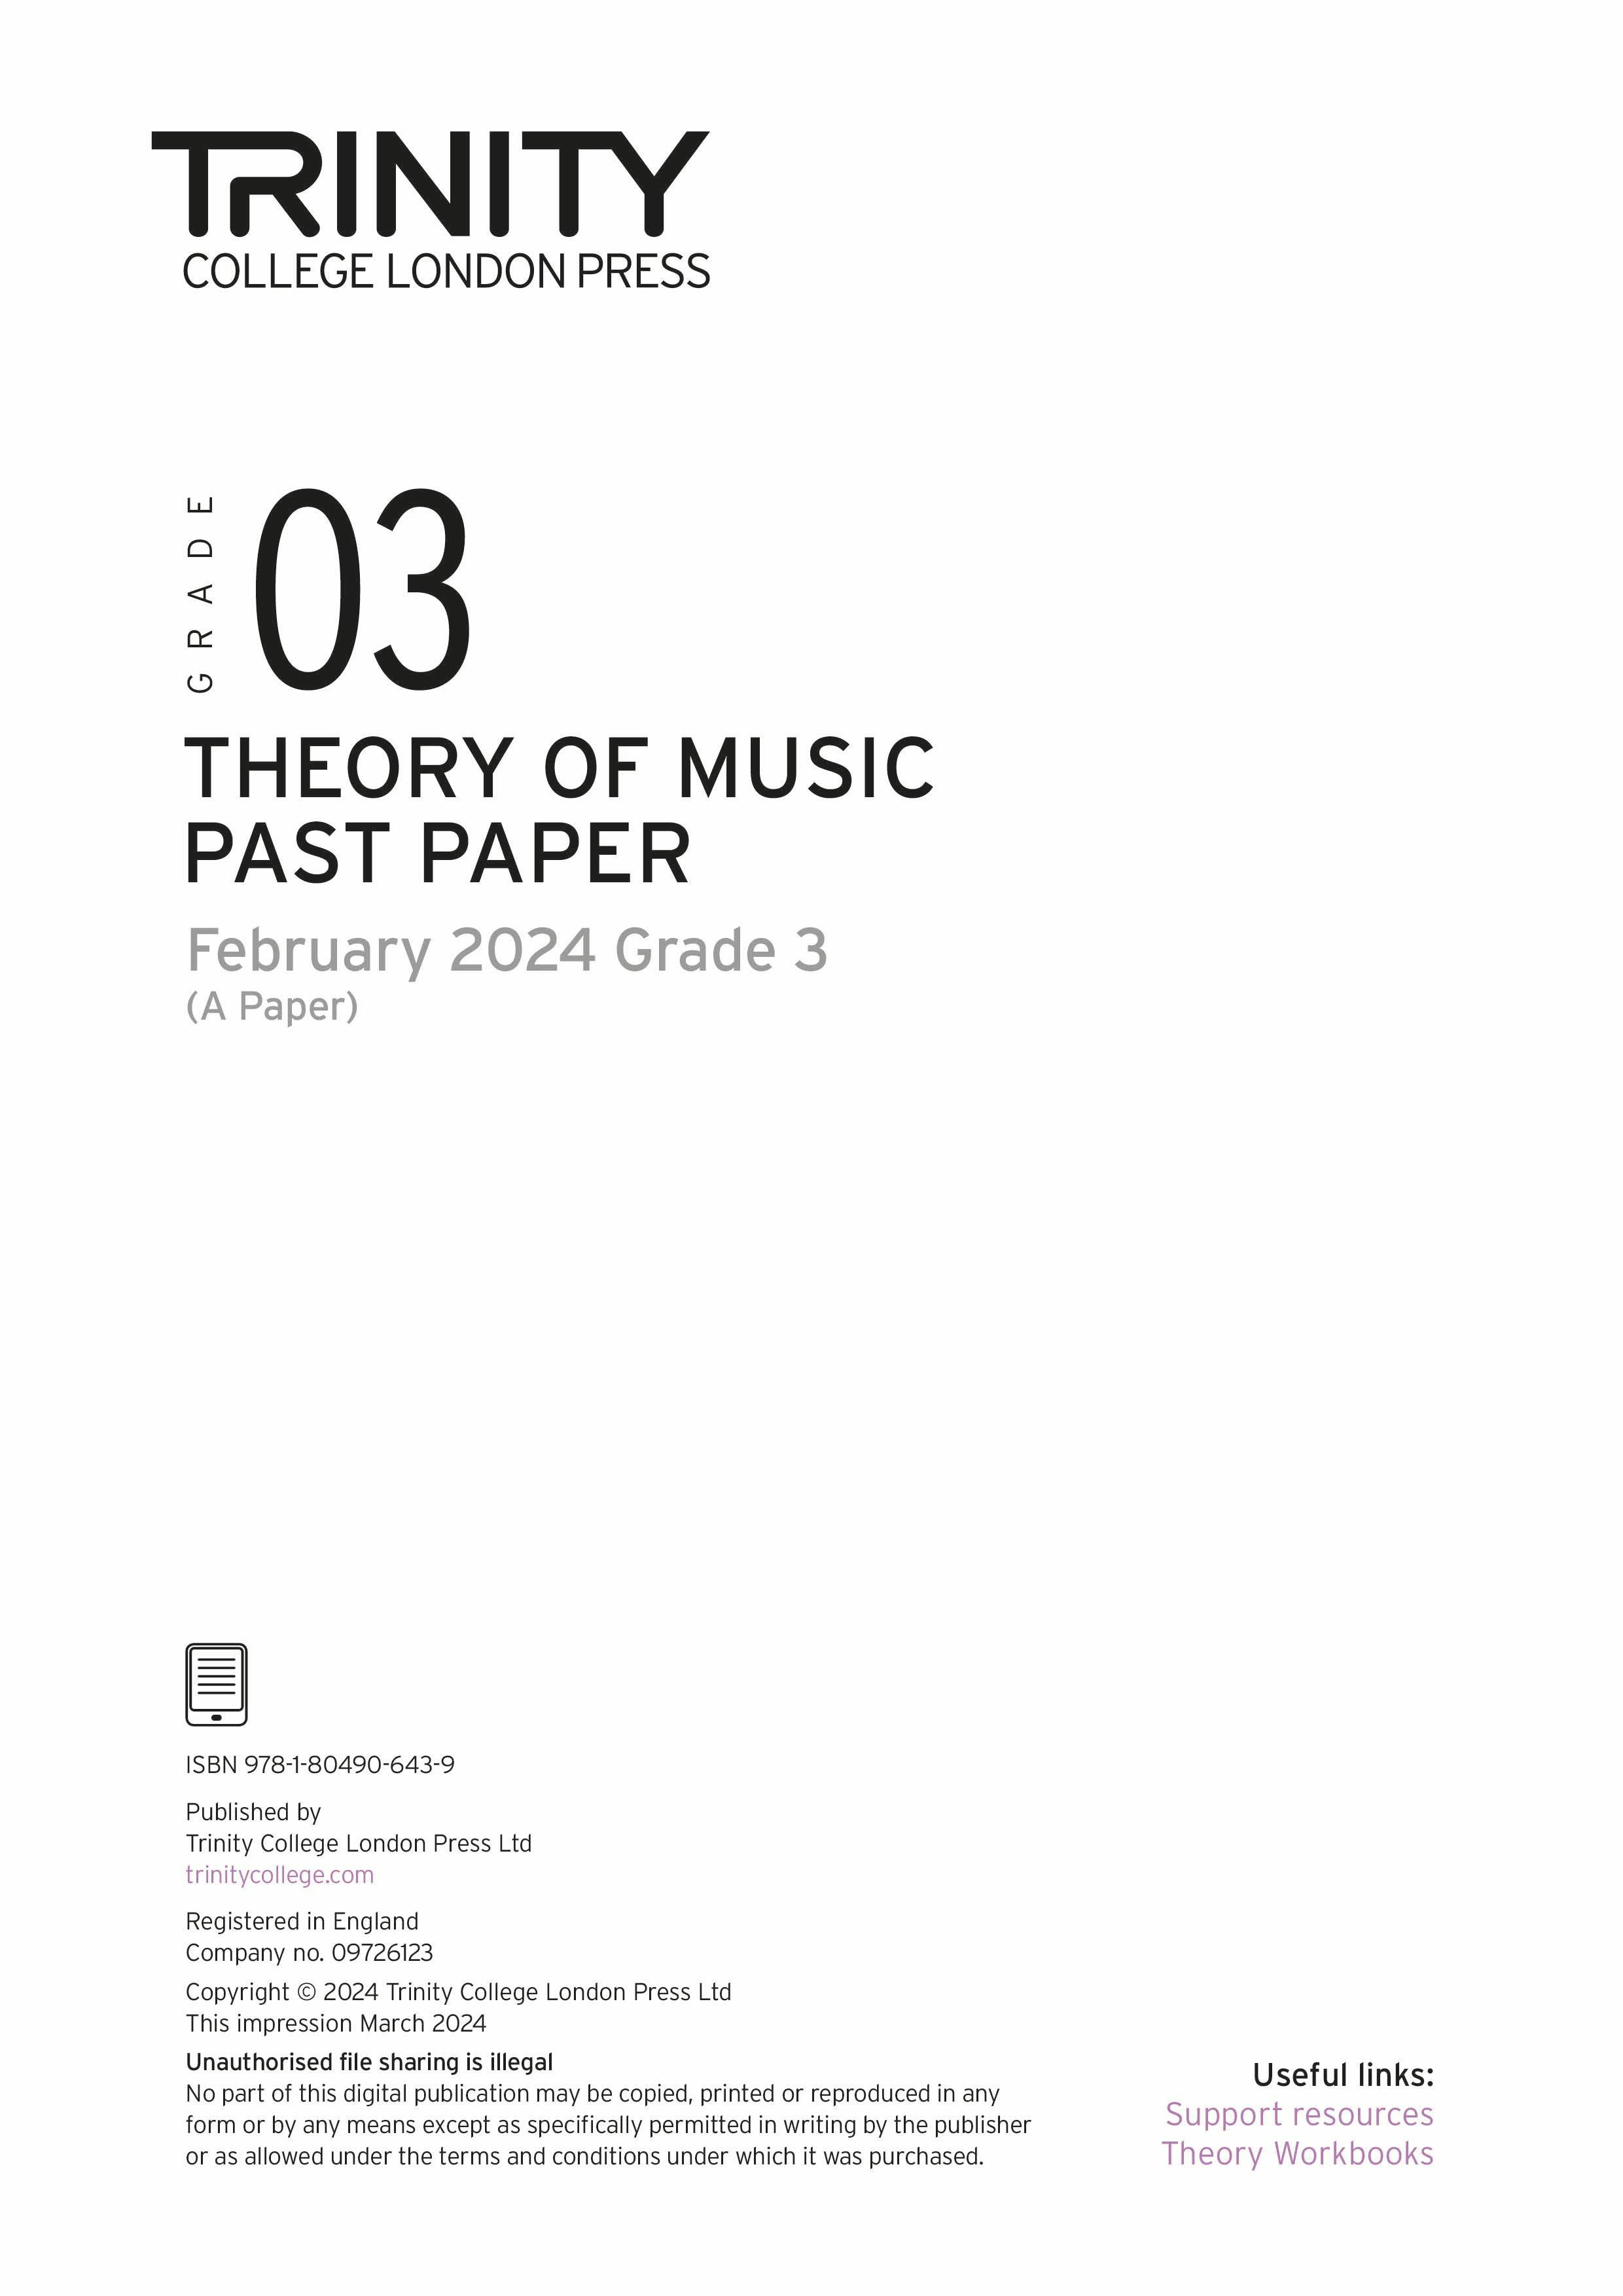 Theory of Music Past Paper 2024 February A: Grade 3 - ebook